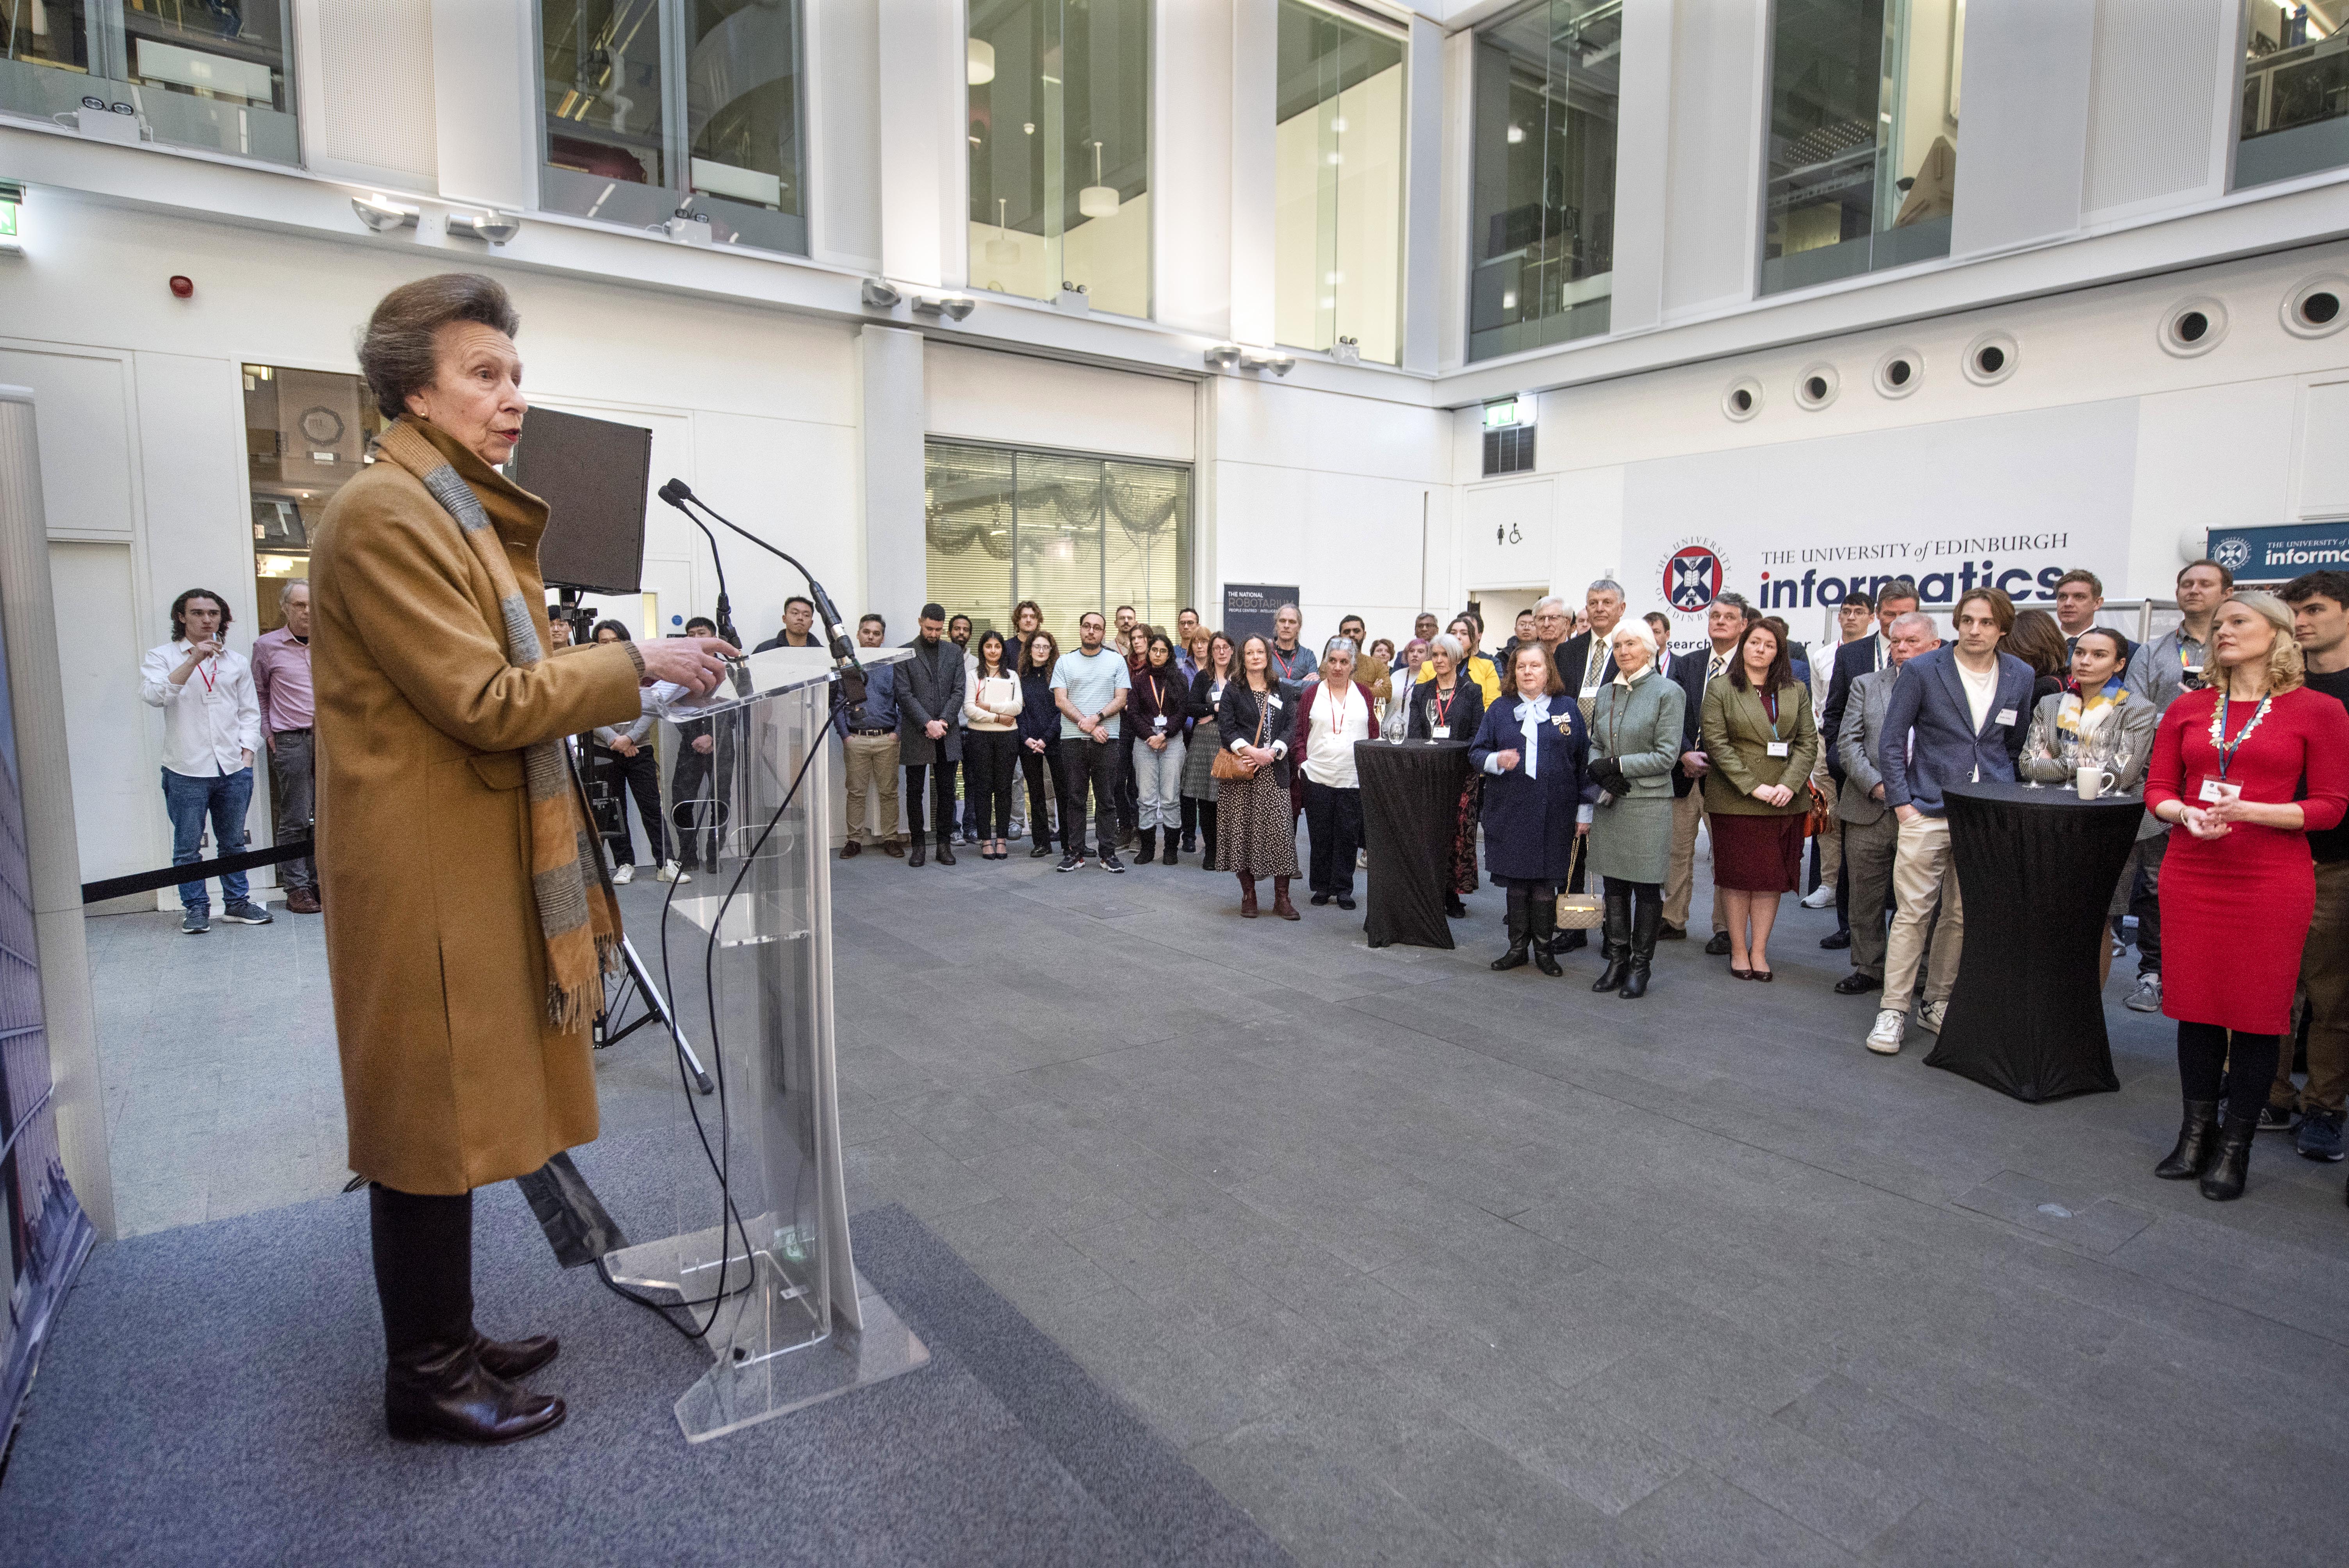 Photograph off The Princess Royal speaking to colleagues from School of Informatics